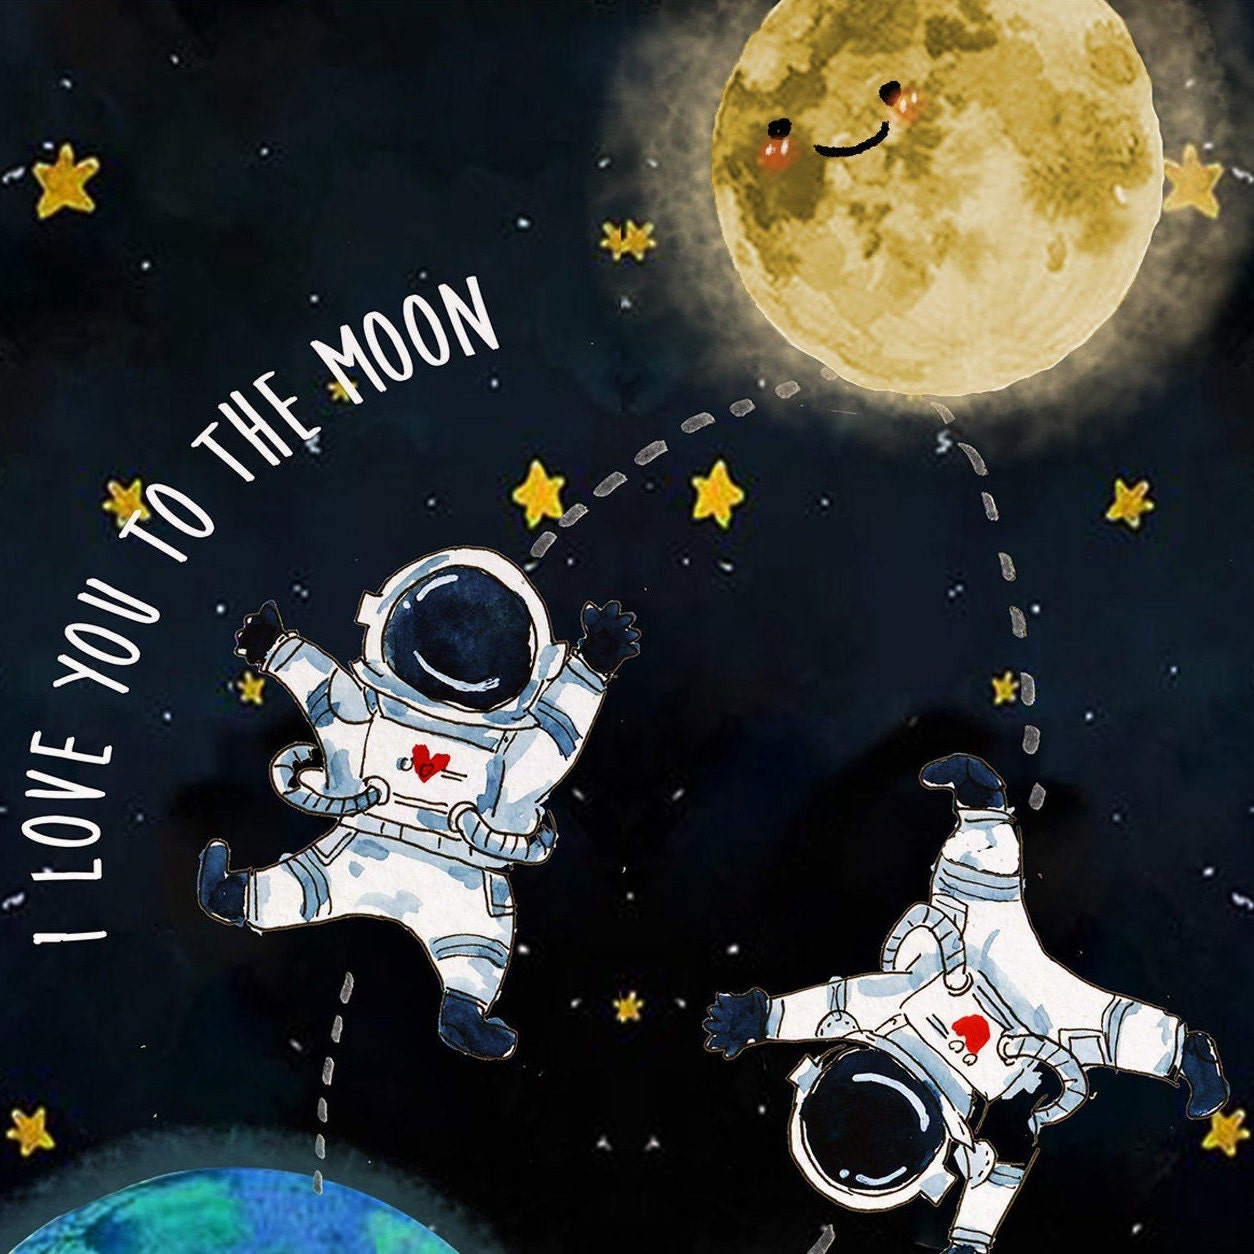 I Love You To The Moon And Back Funny Love Card For Husband, Kids Love Card Funny, Romantic Anniversary Card Astronaut Space Cards For Geek